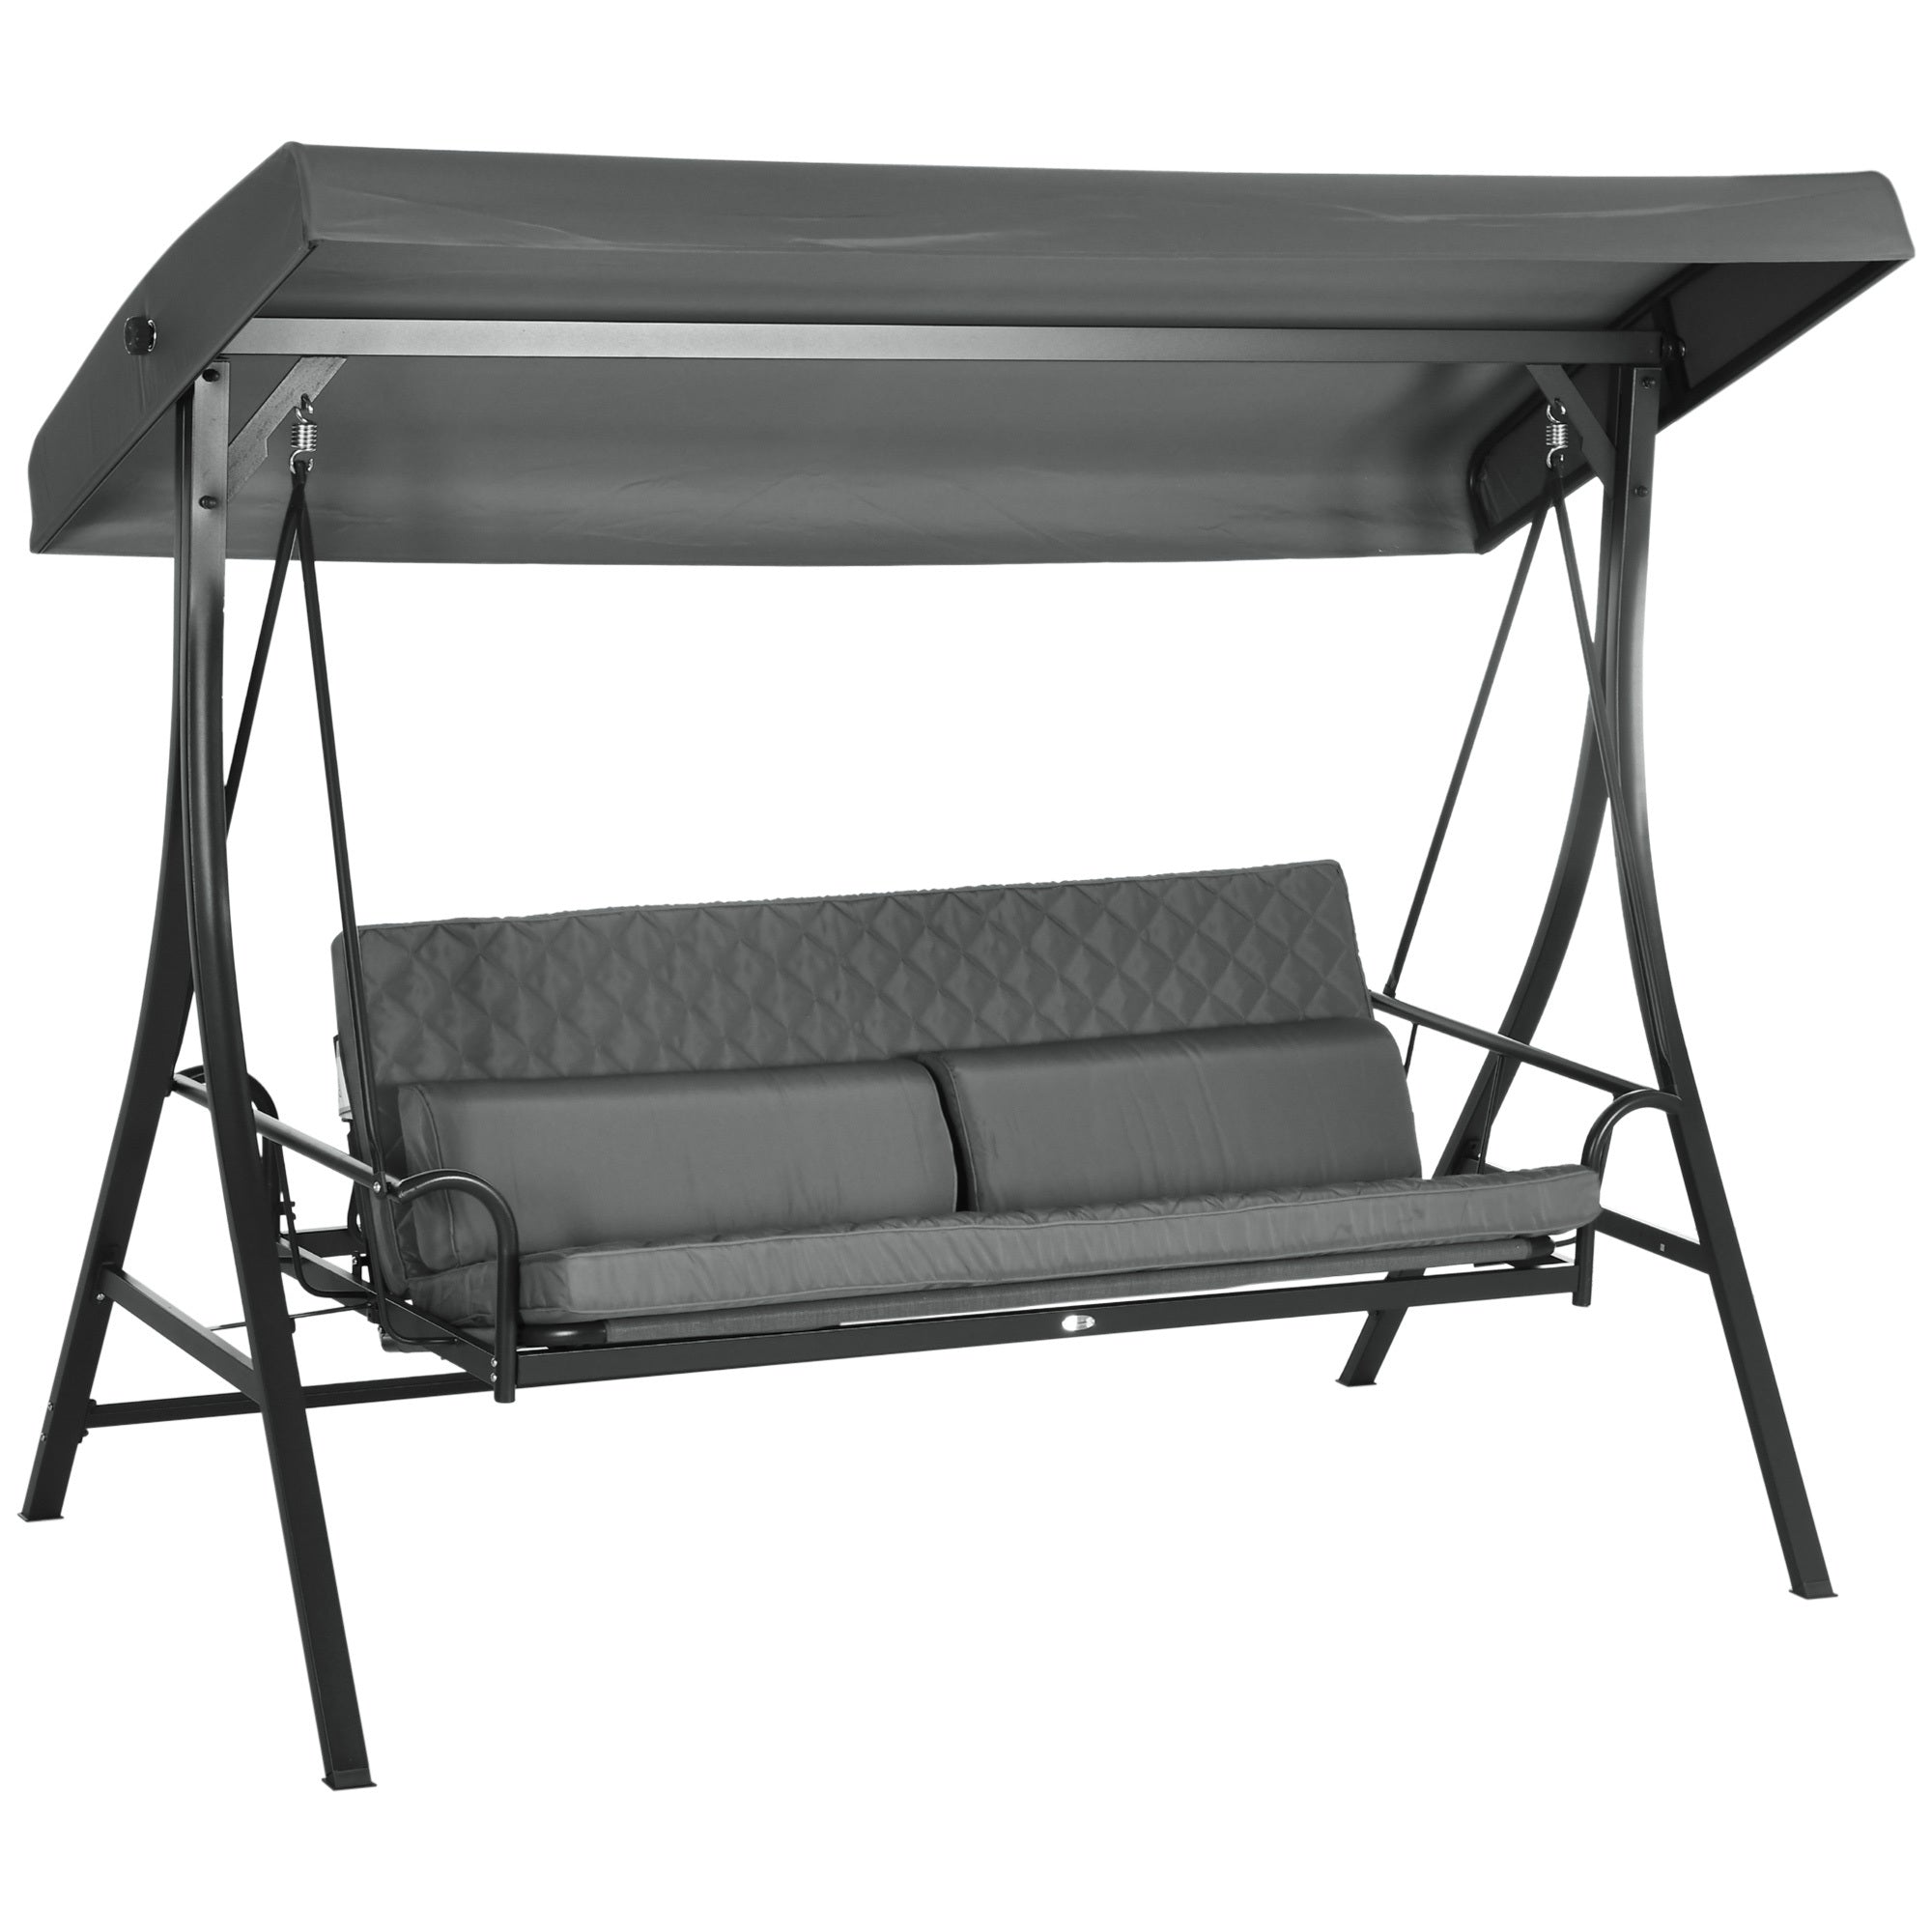 Outsunny 3 Person Patio Swing Chair Bed,